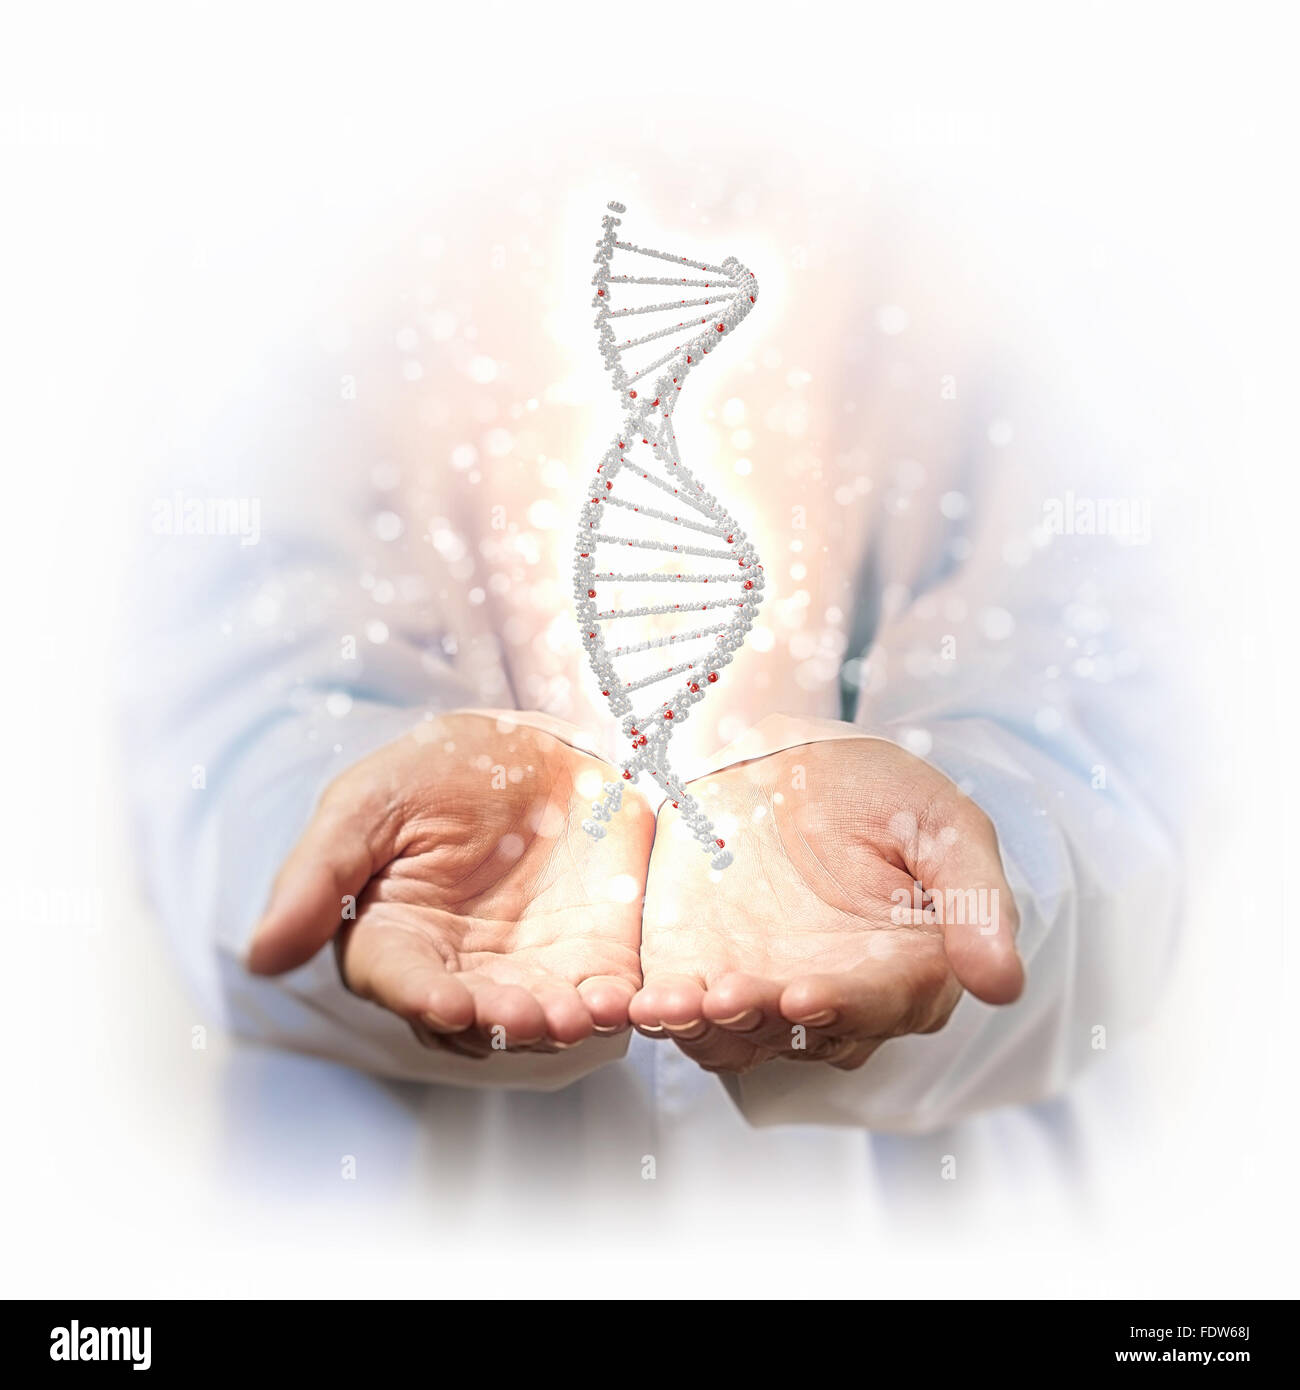 Image of DNA strand against background with human hands Stock Photo